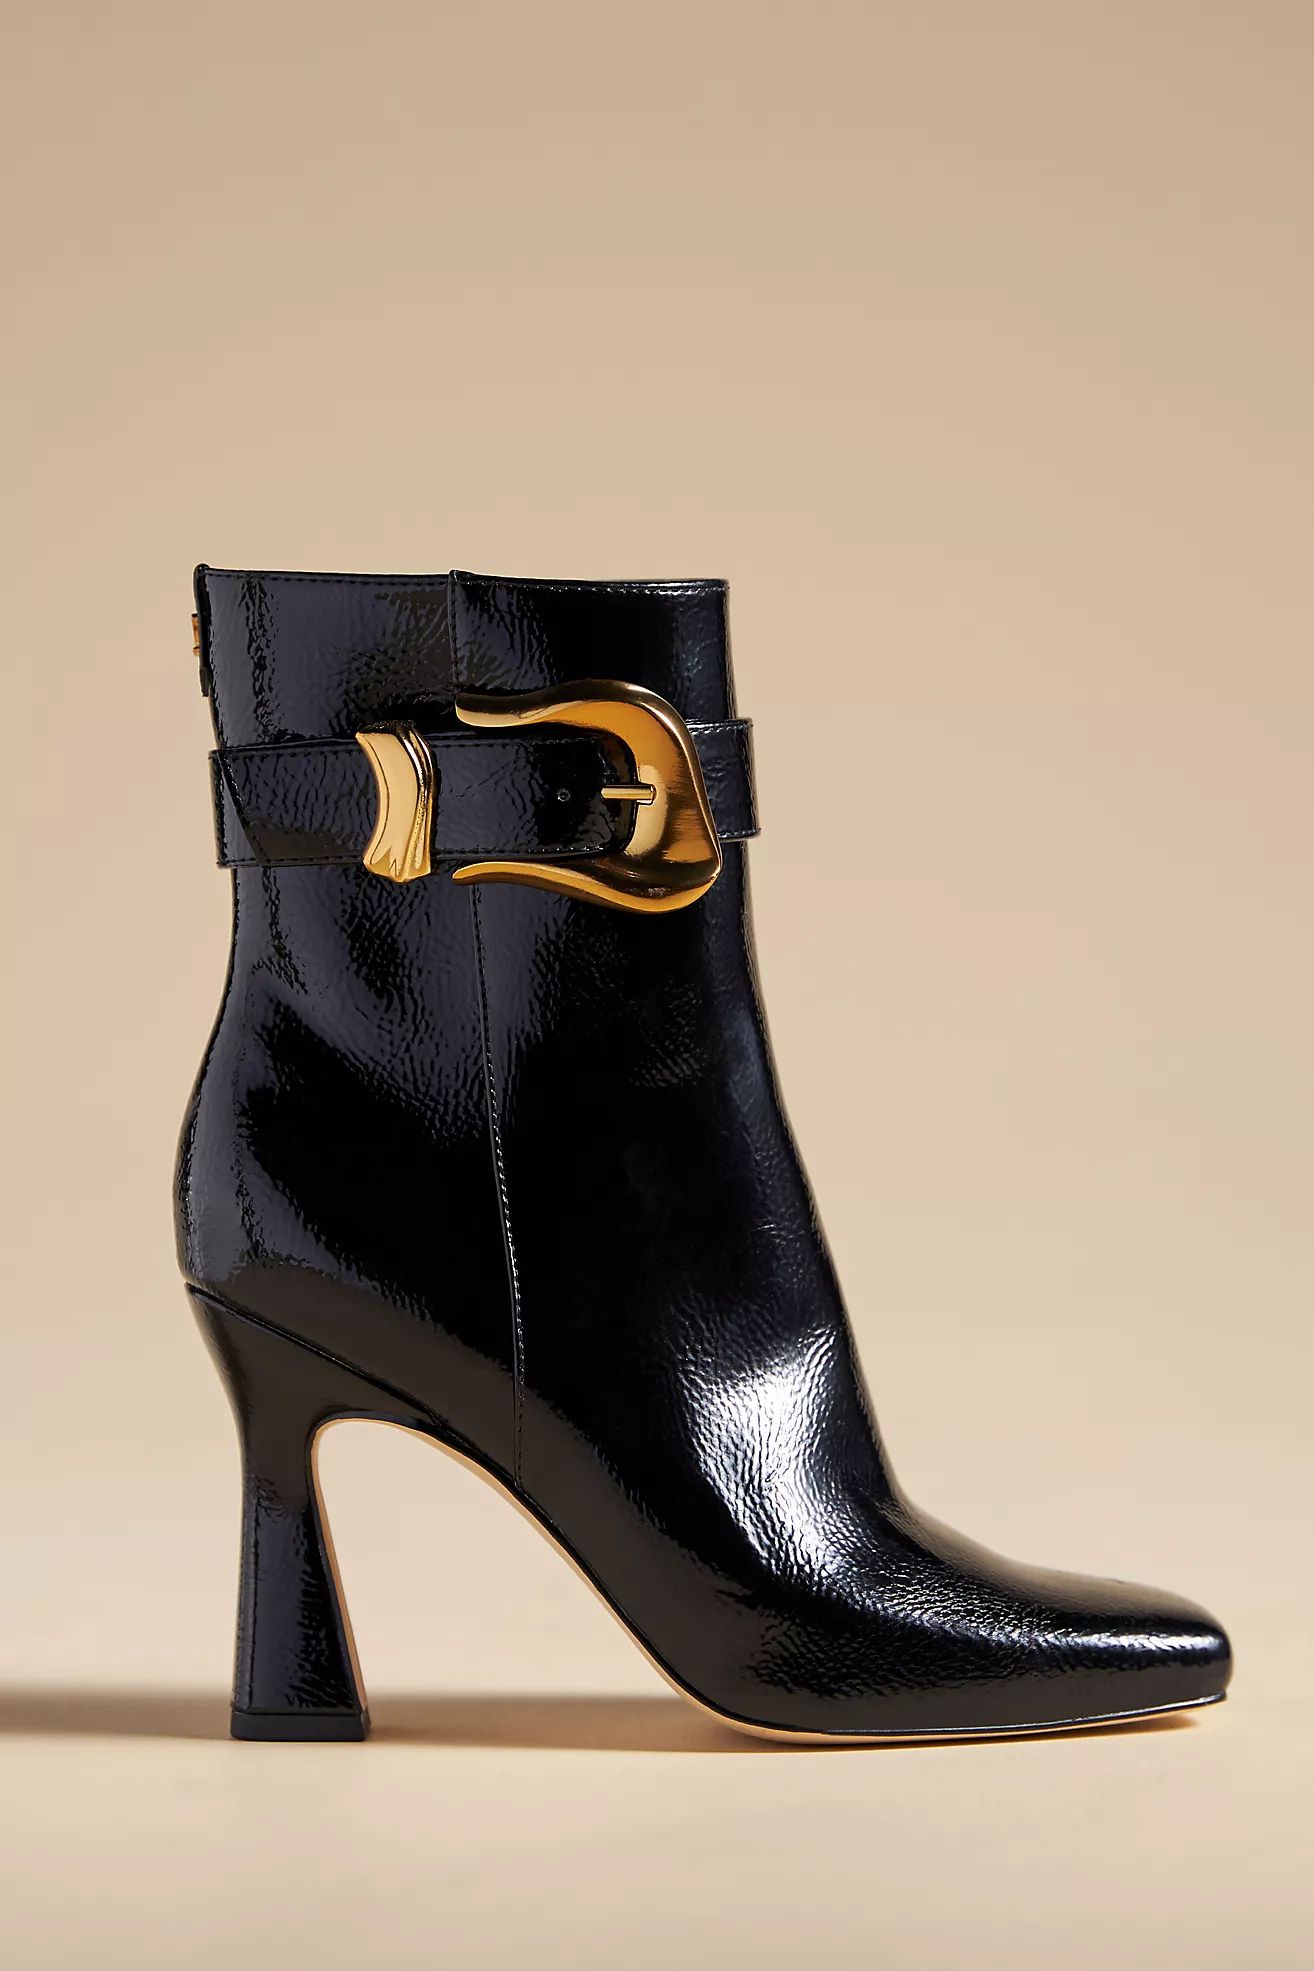 Circus NY Evie Boots | Anthropologie (US)